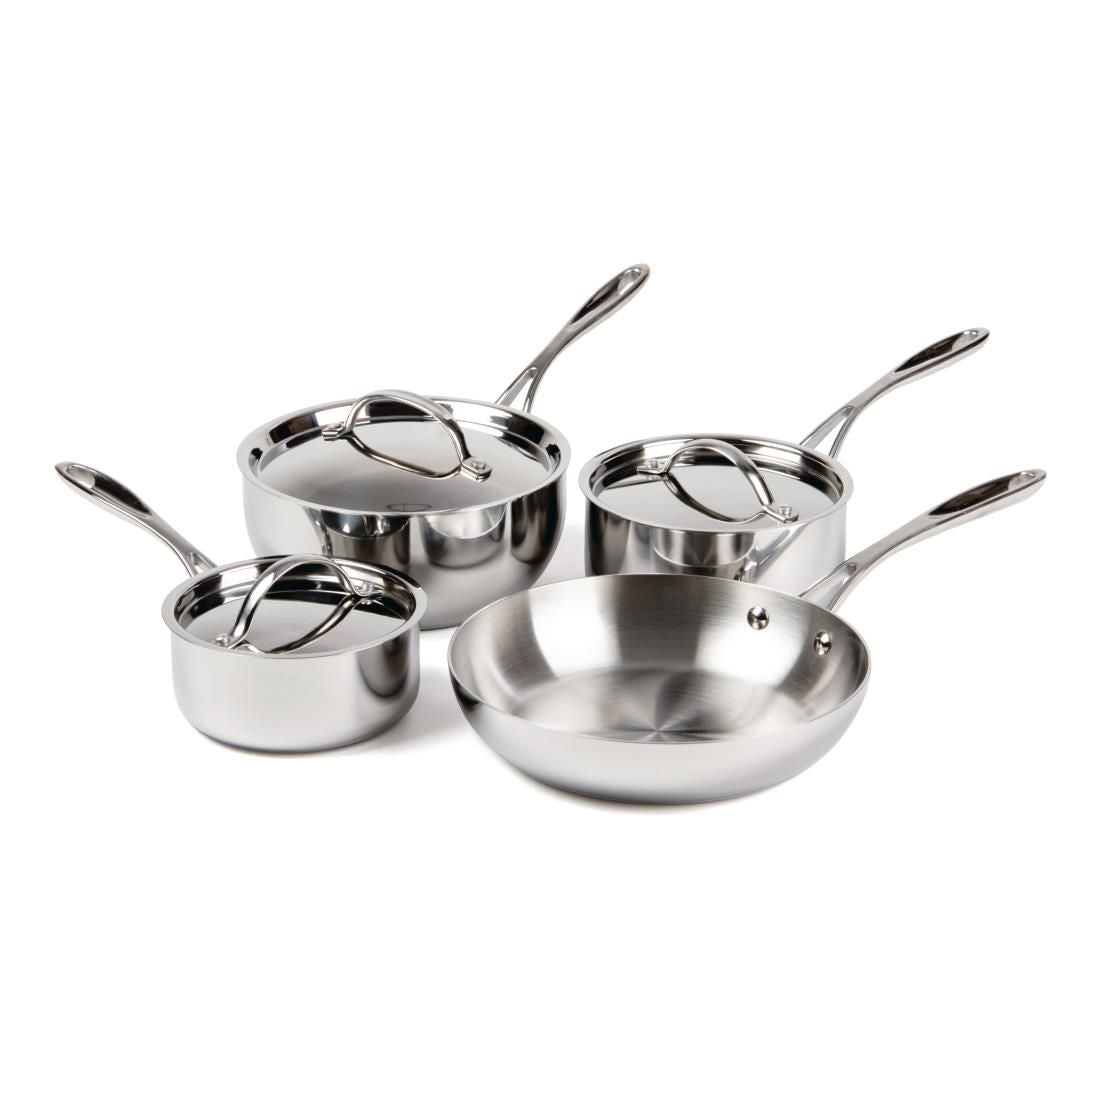 (Availability Mid May) S888 Vogue Tri Wall Pan Set of 4 Pans